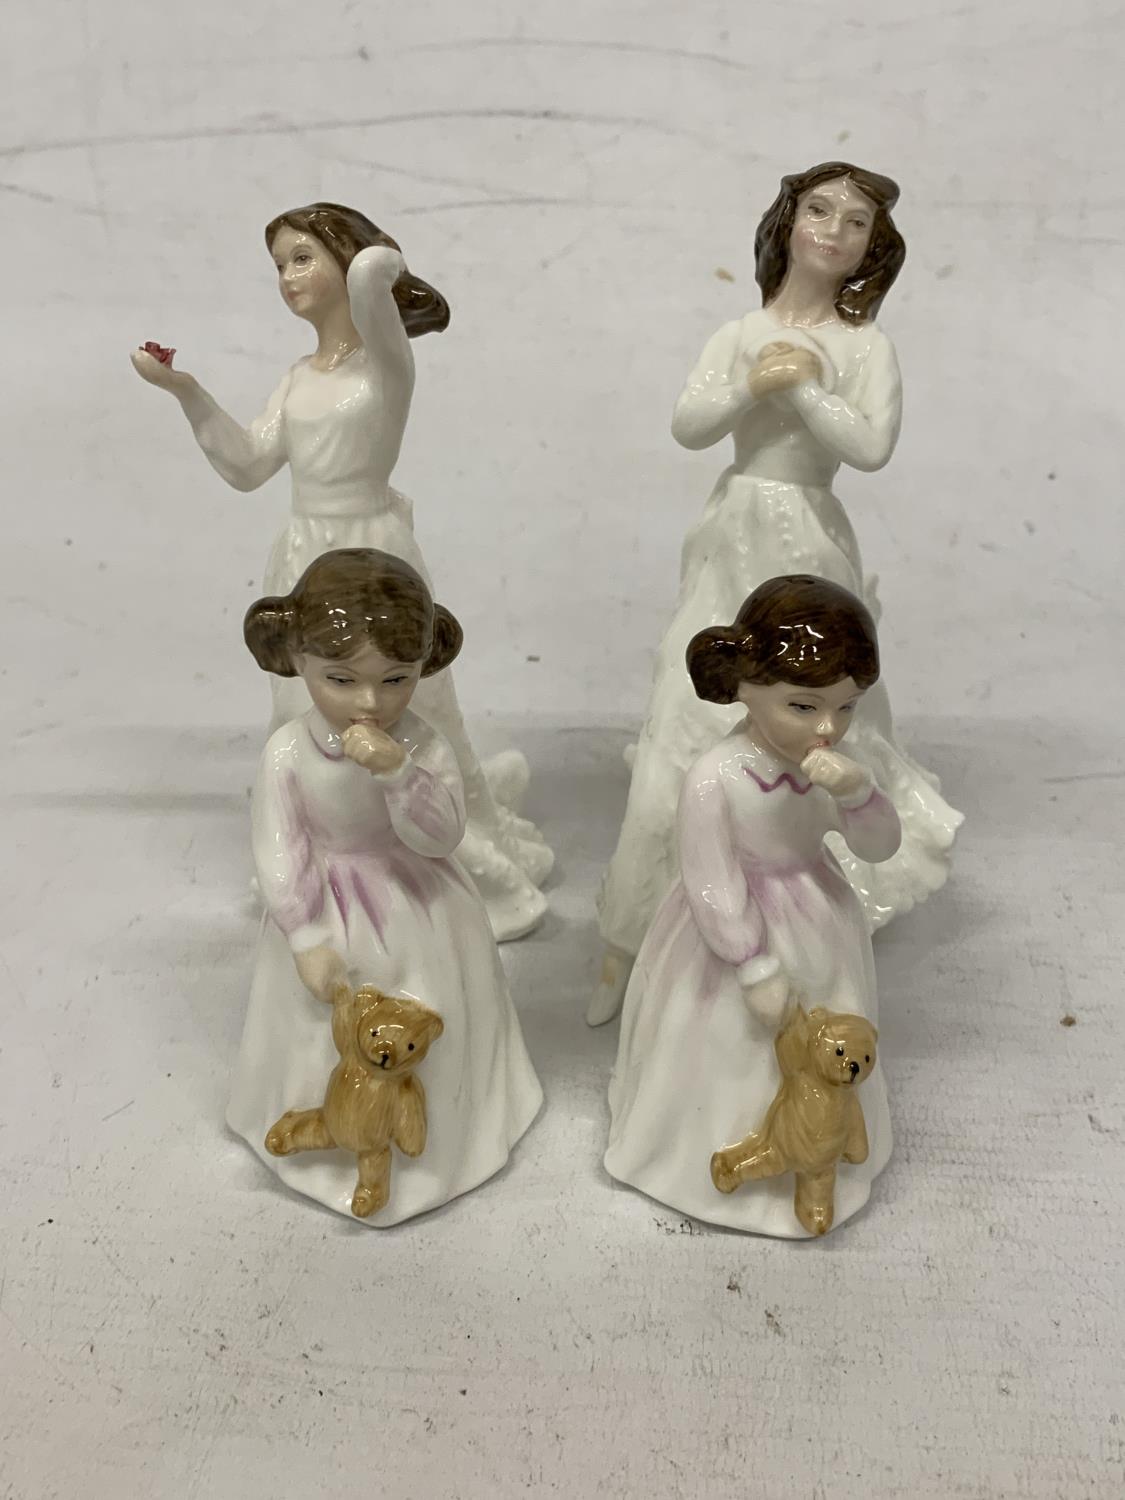 FOUR ROYAL DOULTON FIGURINES "WITH LOVE" AND "FORGET-ME-NOT" AND "DADDY'S GIRL" (2 OF)